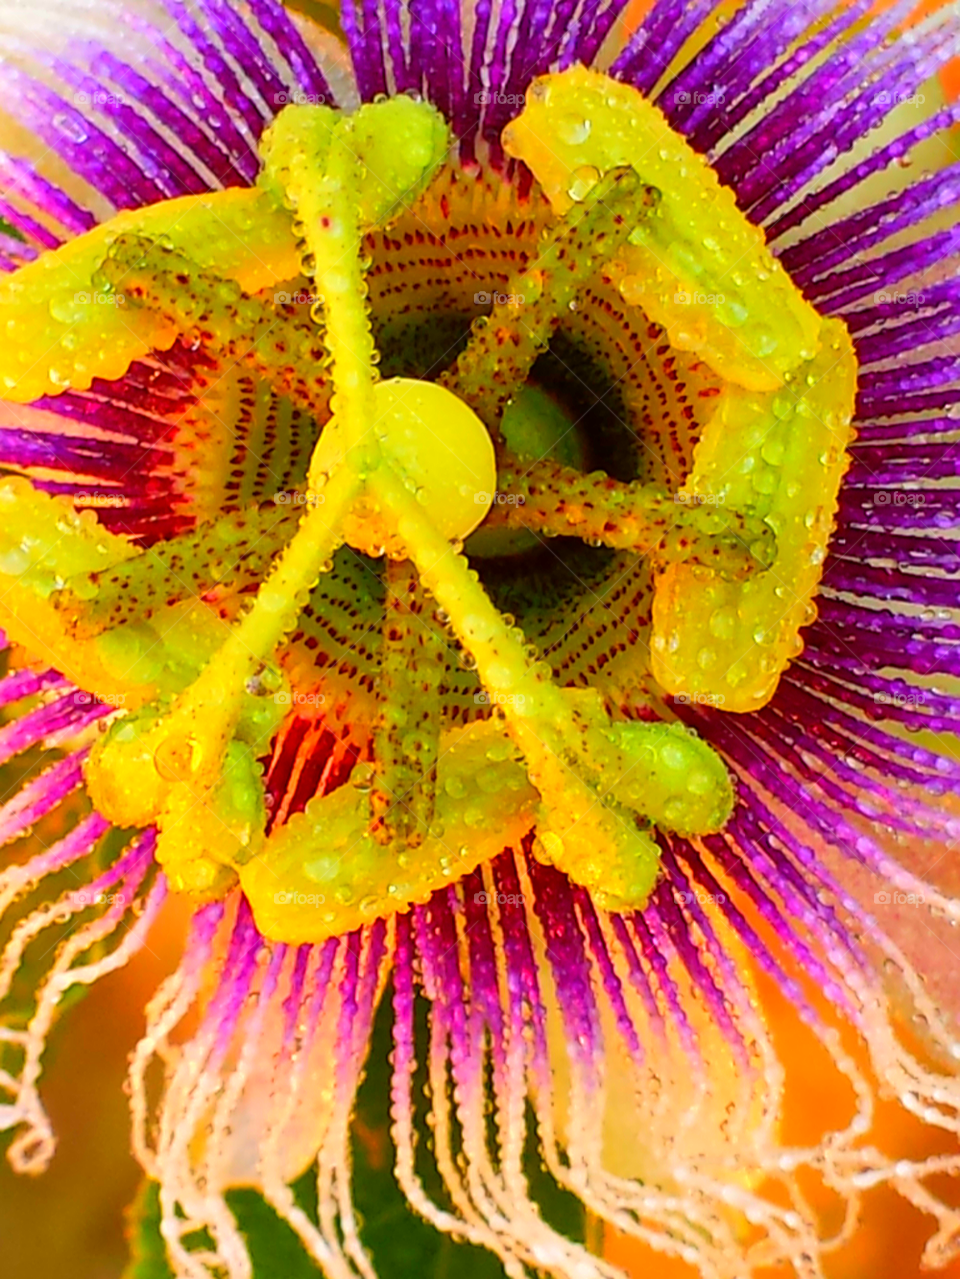 "Passion Flower On A Rainy Day"